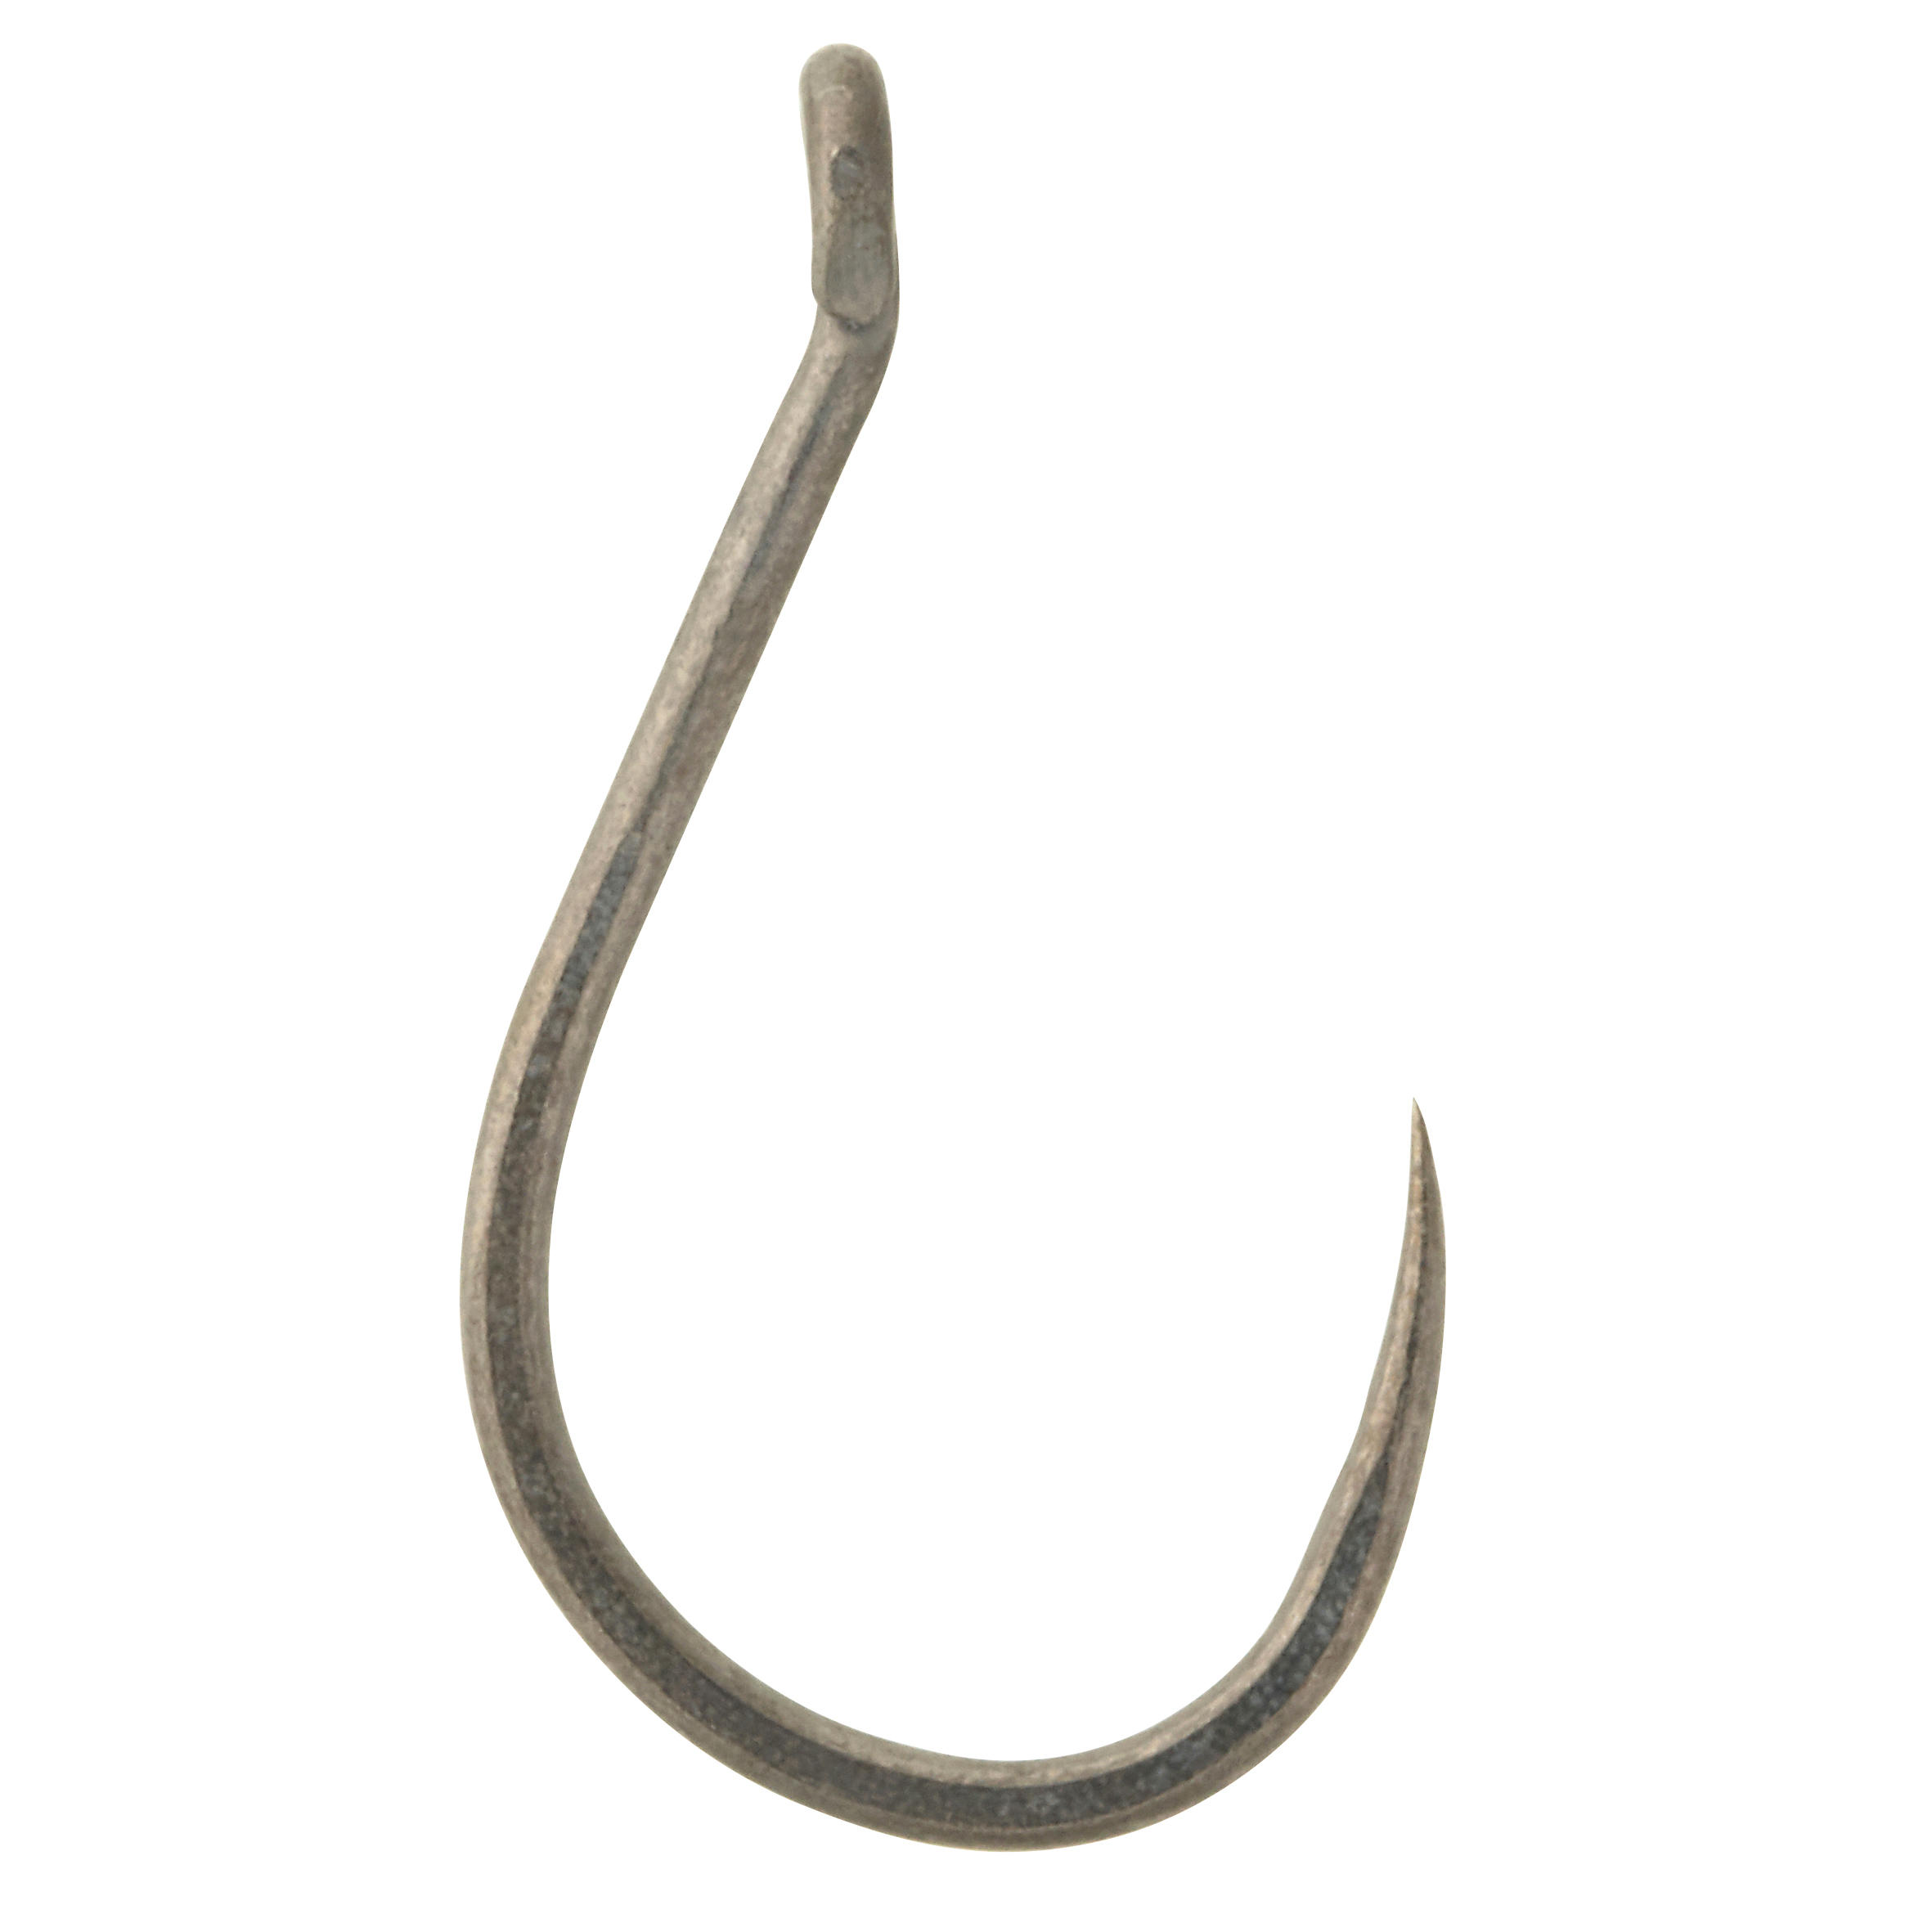 Unrigged round circle hooks for carp fisheries 
(PF - HK CCR) 3/4